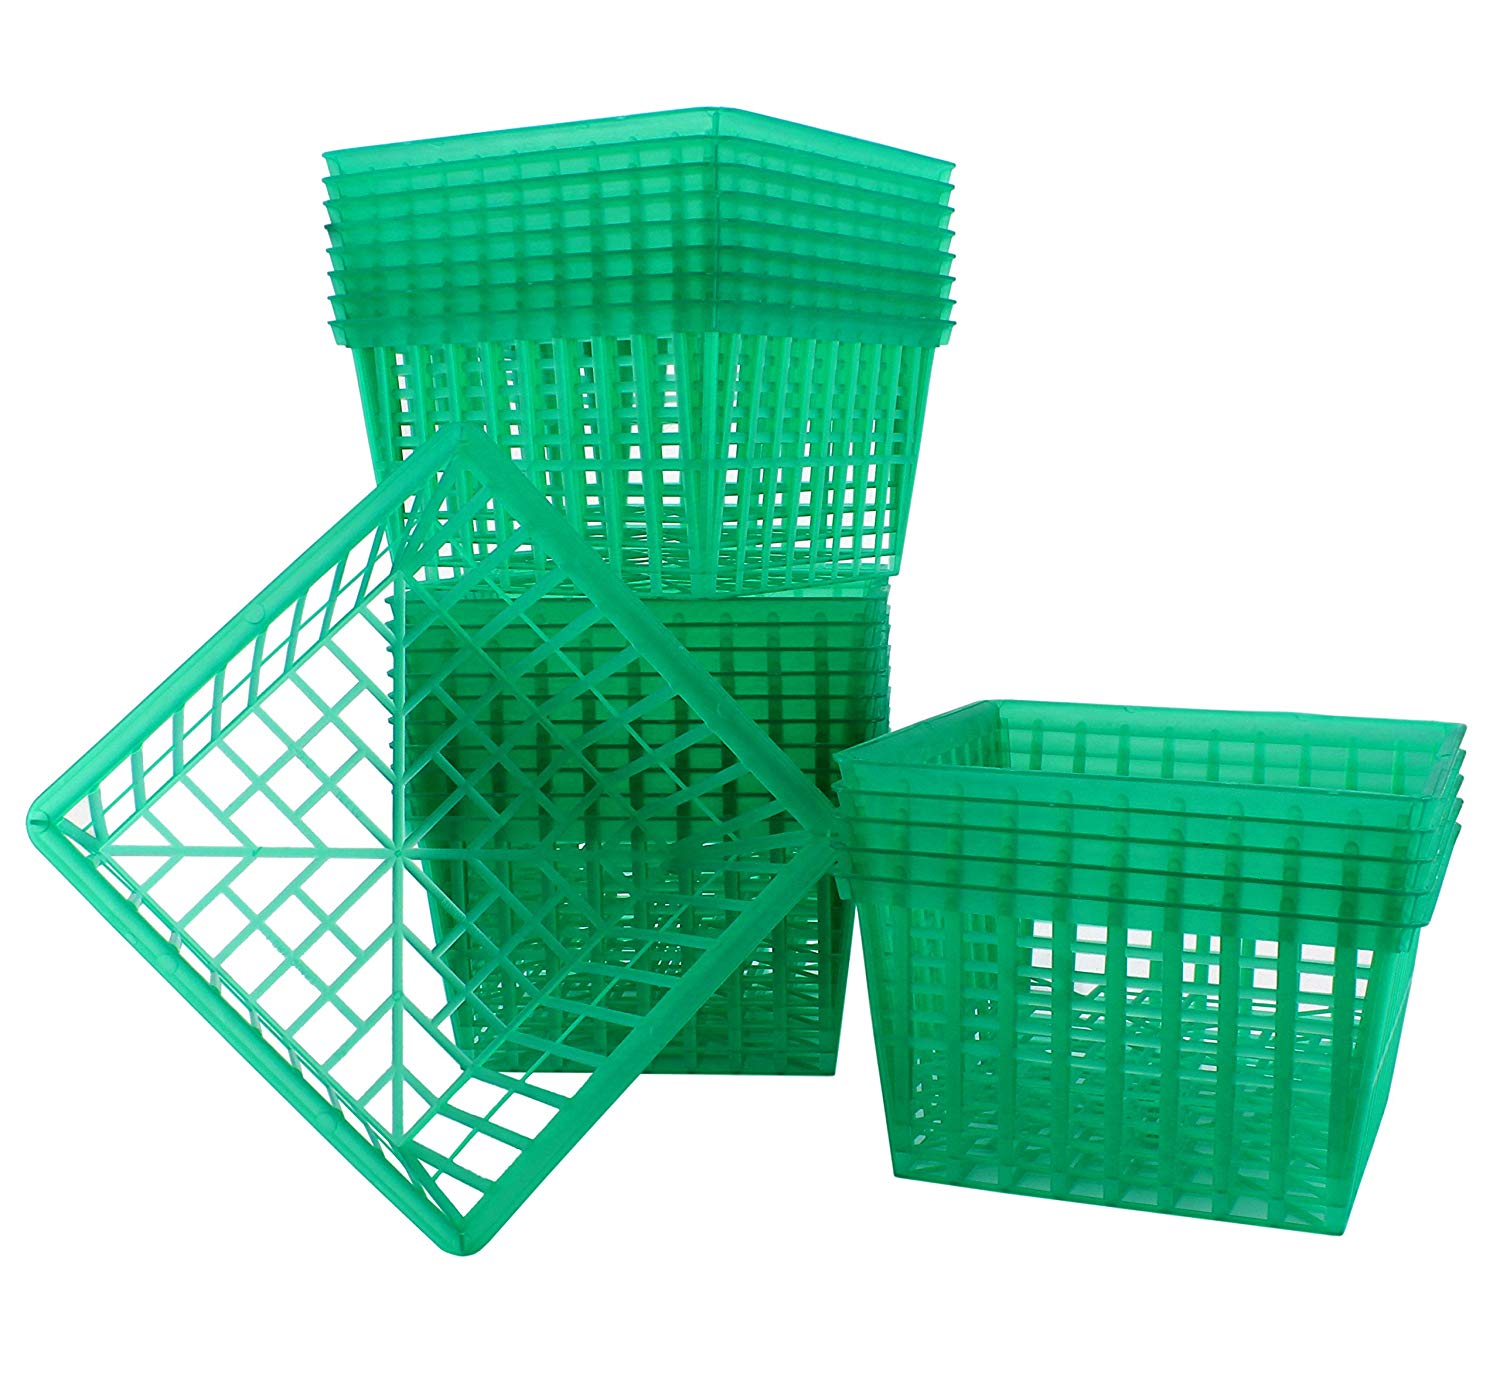 24-Pack Quart Size Plastic Berry Baskets; 5 ½-Inch Green Berry Boxes w/Open-Weave Pattern; Ideal for Berries, Fruit, Vegetables & Craft Projects